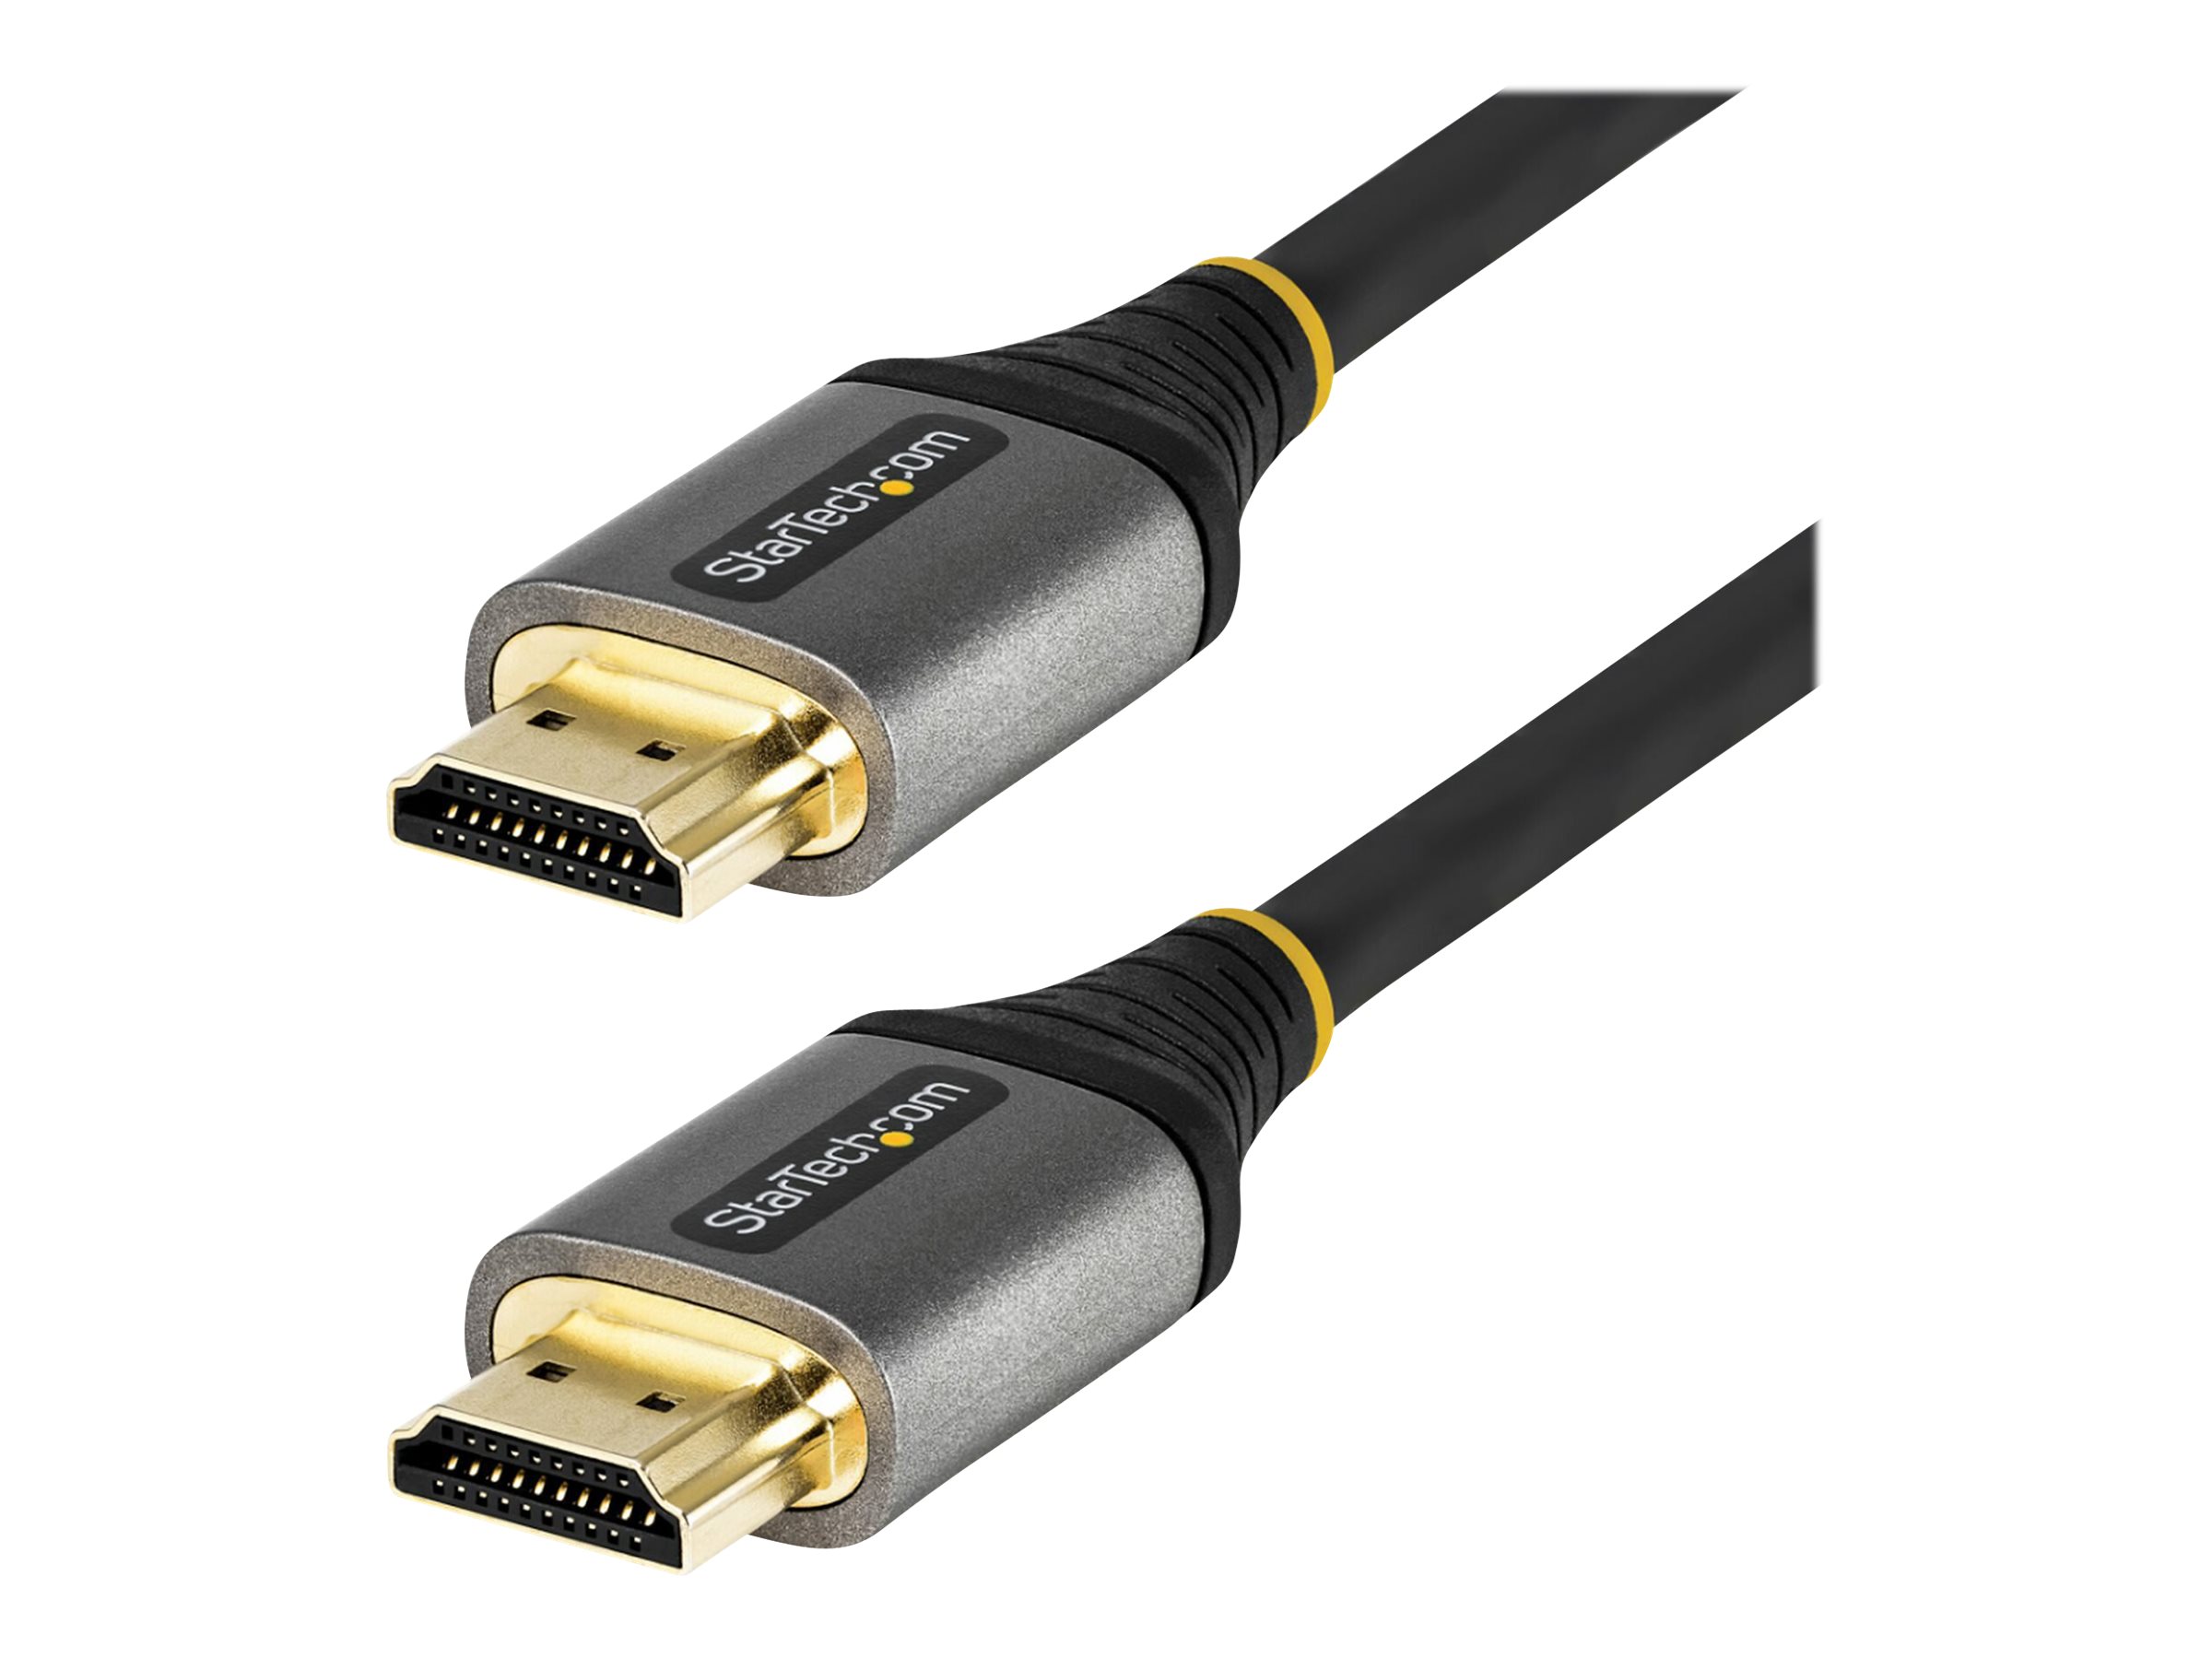 StarTech.com 13ft (4m) Premium Certified HDMI 2.0 Cable - High-Speed Ultra HD 4K 60Hz HDMI Cable with Ethernet - HDR10, ARC - UHD HDMI Video Cord - For UHD Monitors, TVs, Displays - M/M - HDMI-Kabel mit Ethernet - 4 m